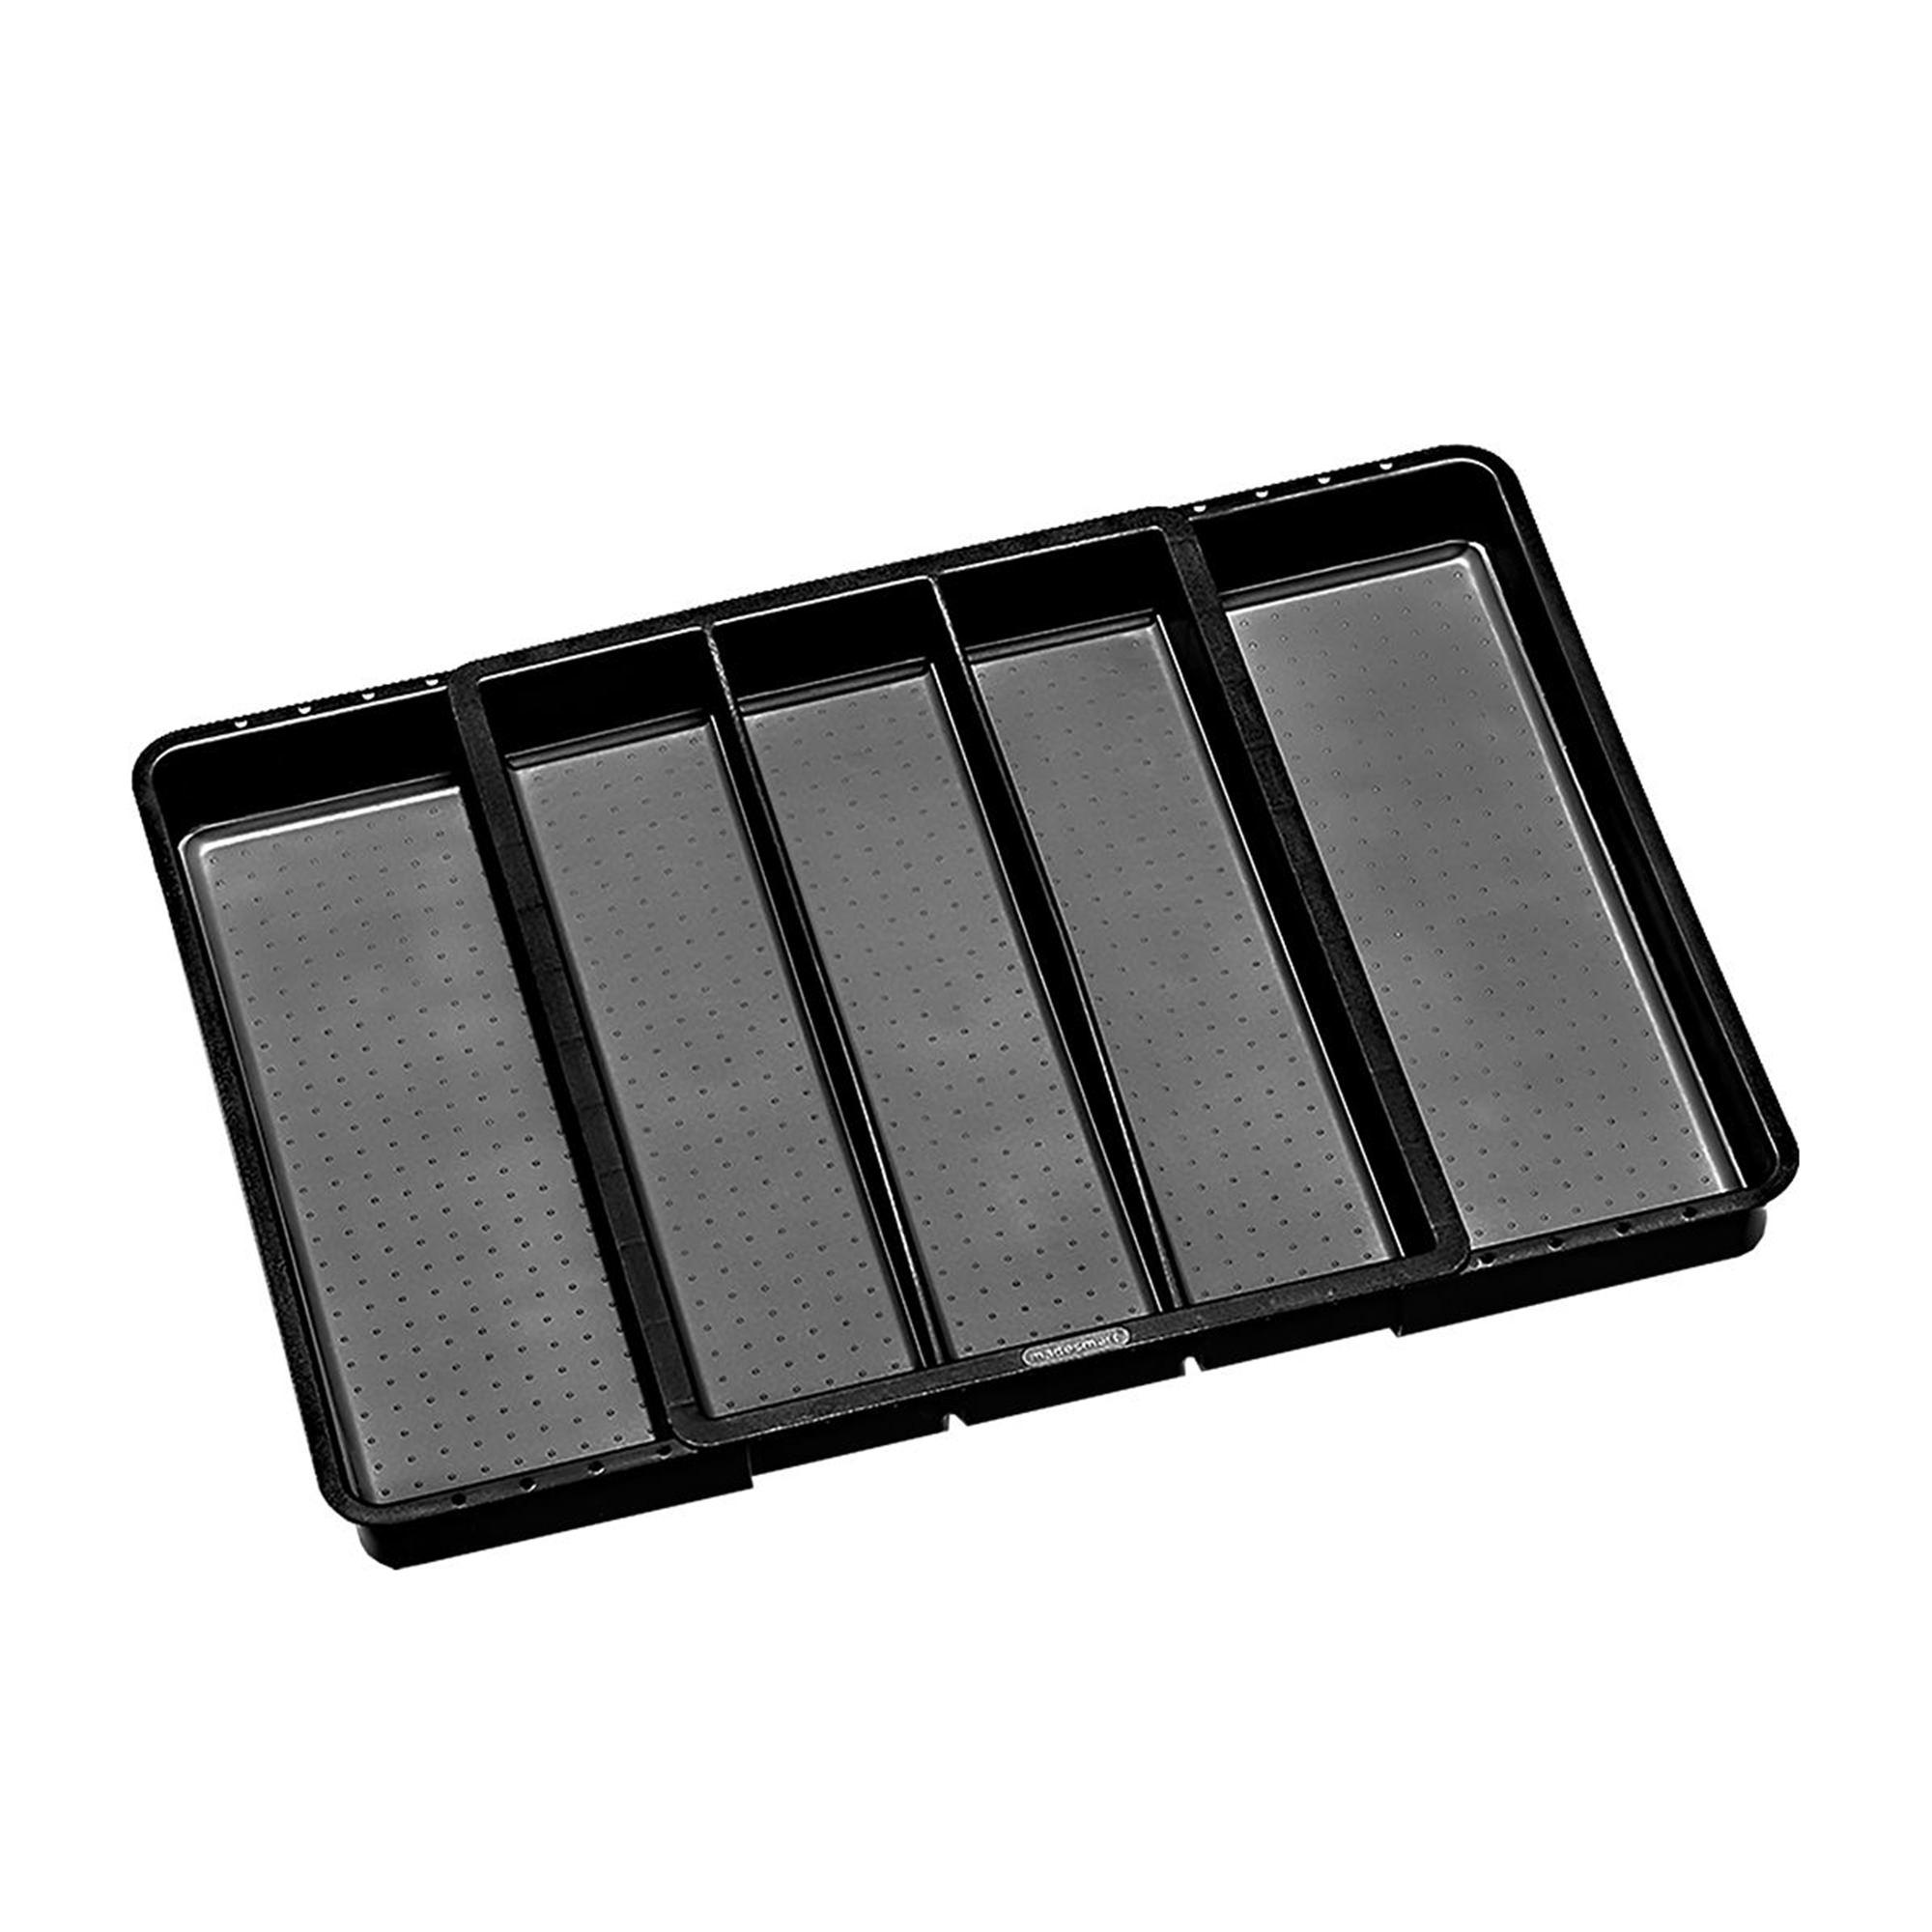 Madesmart Expandable Utensil Tray Carbon Image 2